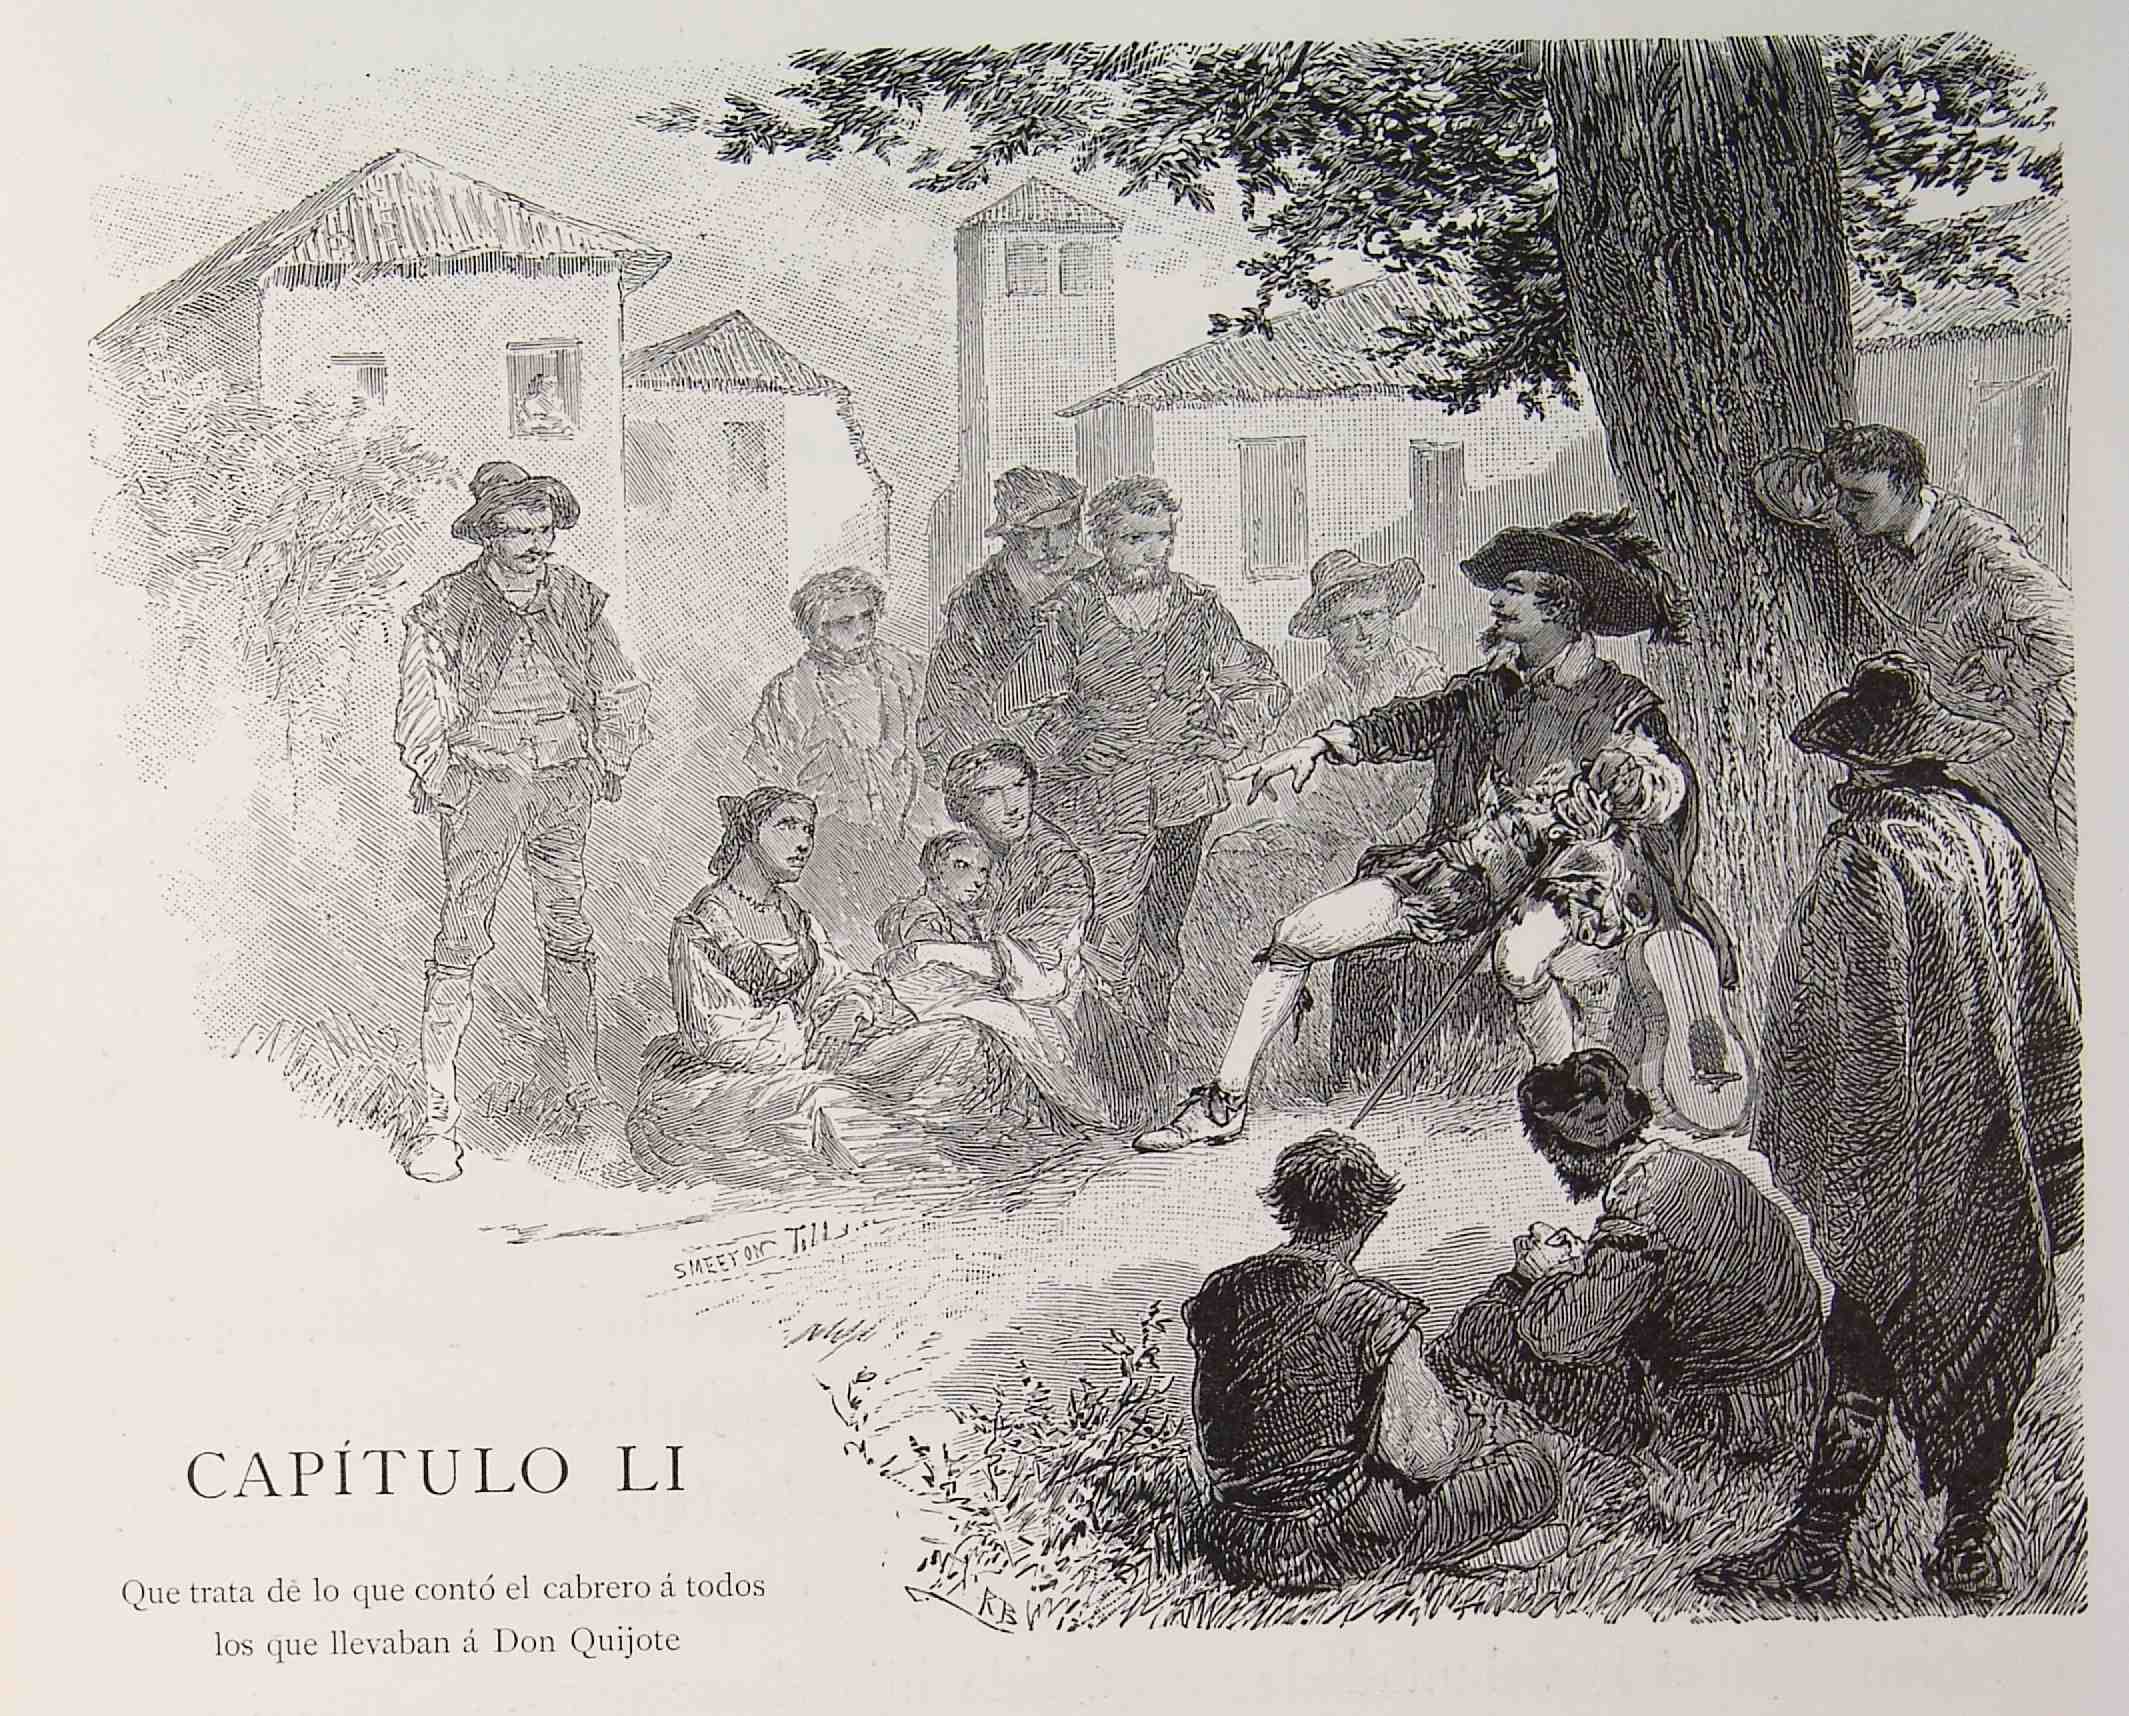 an old fashioned illustration shows people gathered in the woods